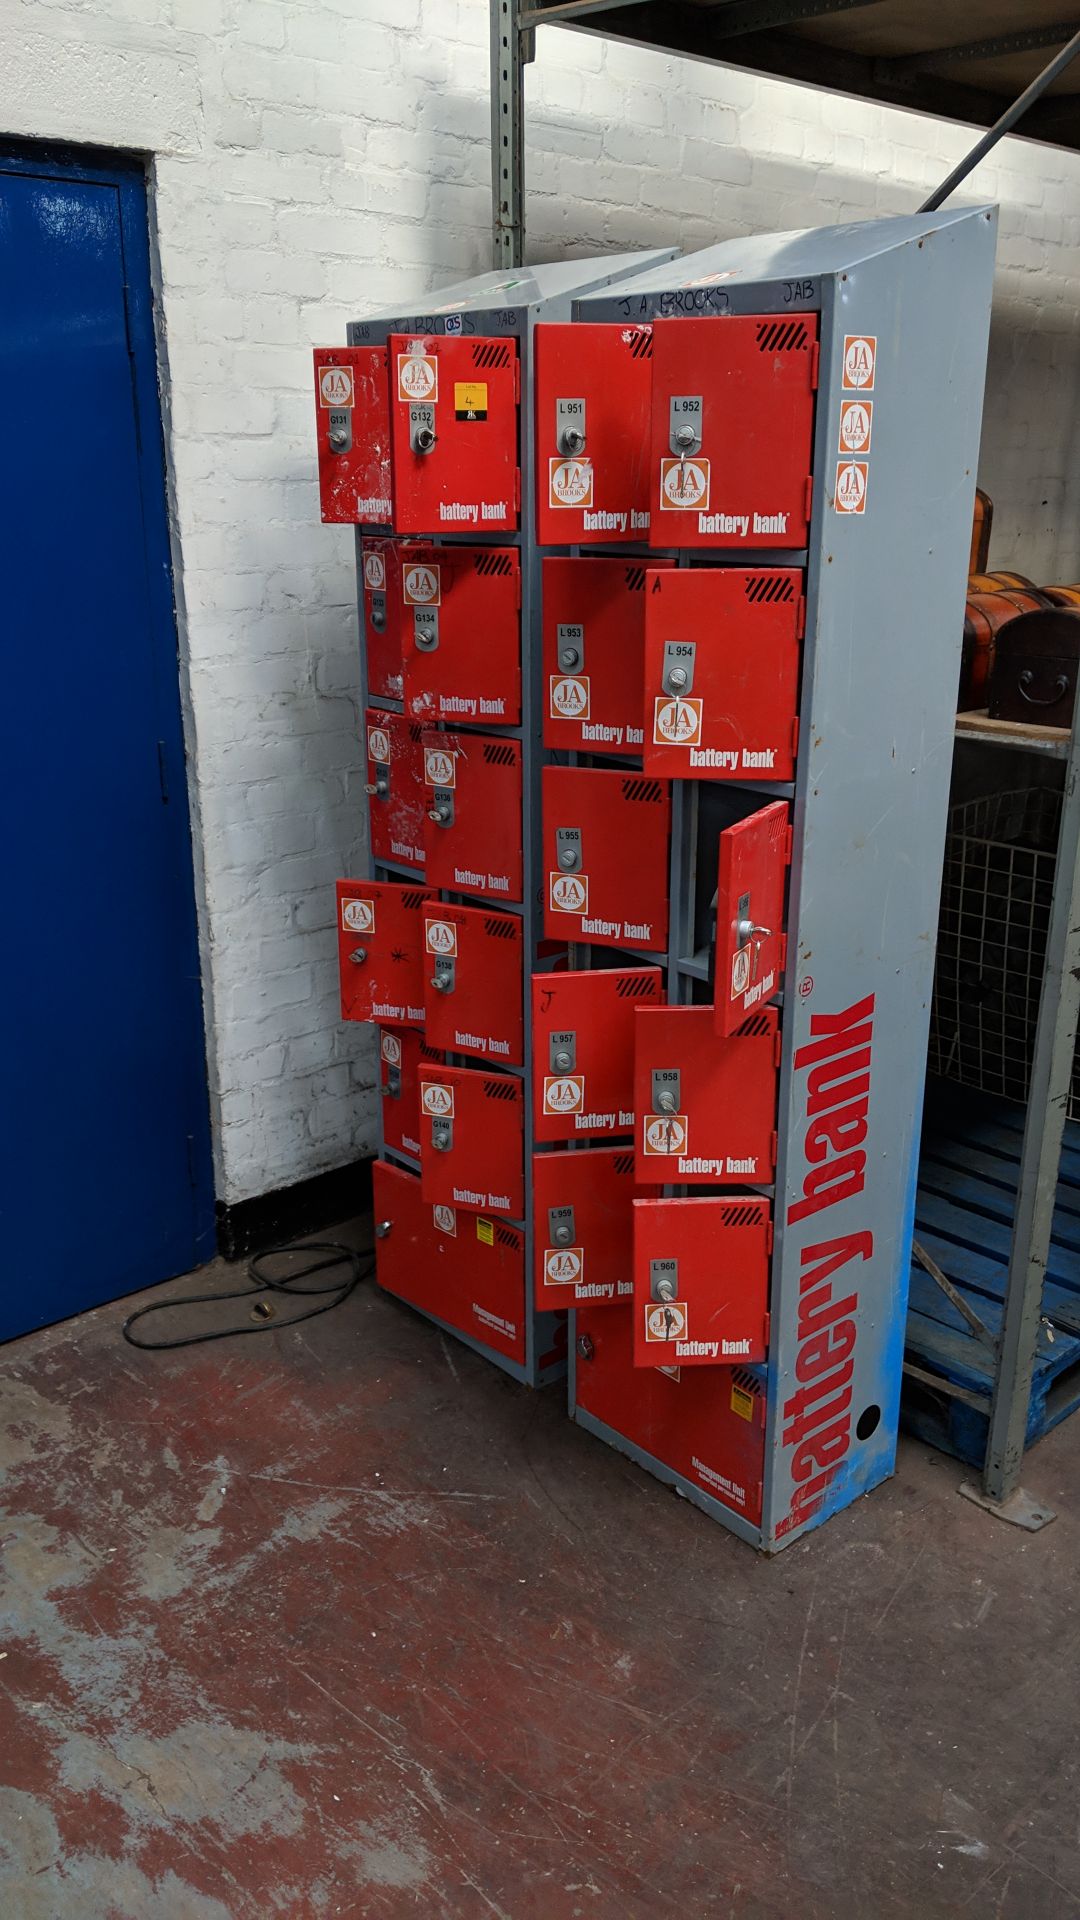 2 off battery bank lockable cubicles, each comprising a total of 12 small lockable cubicles with - Image 5 of 7